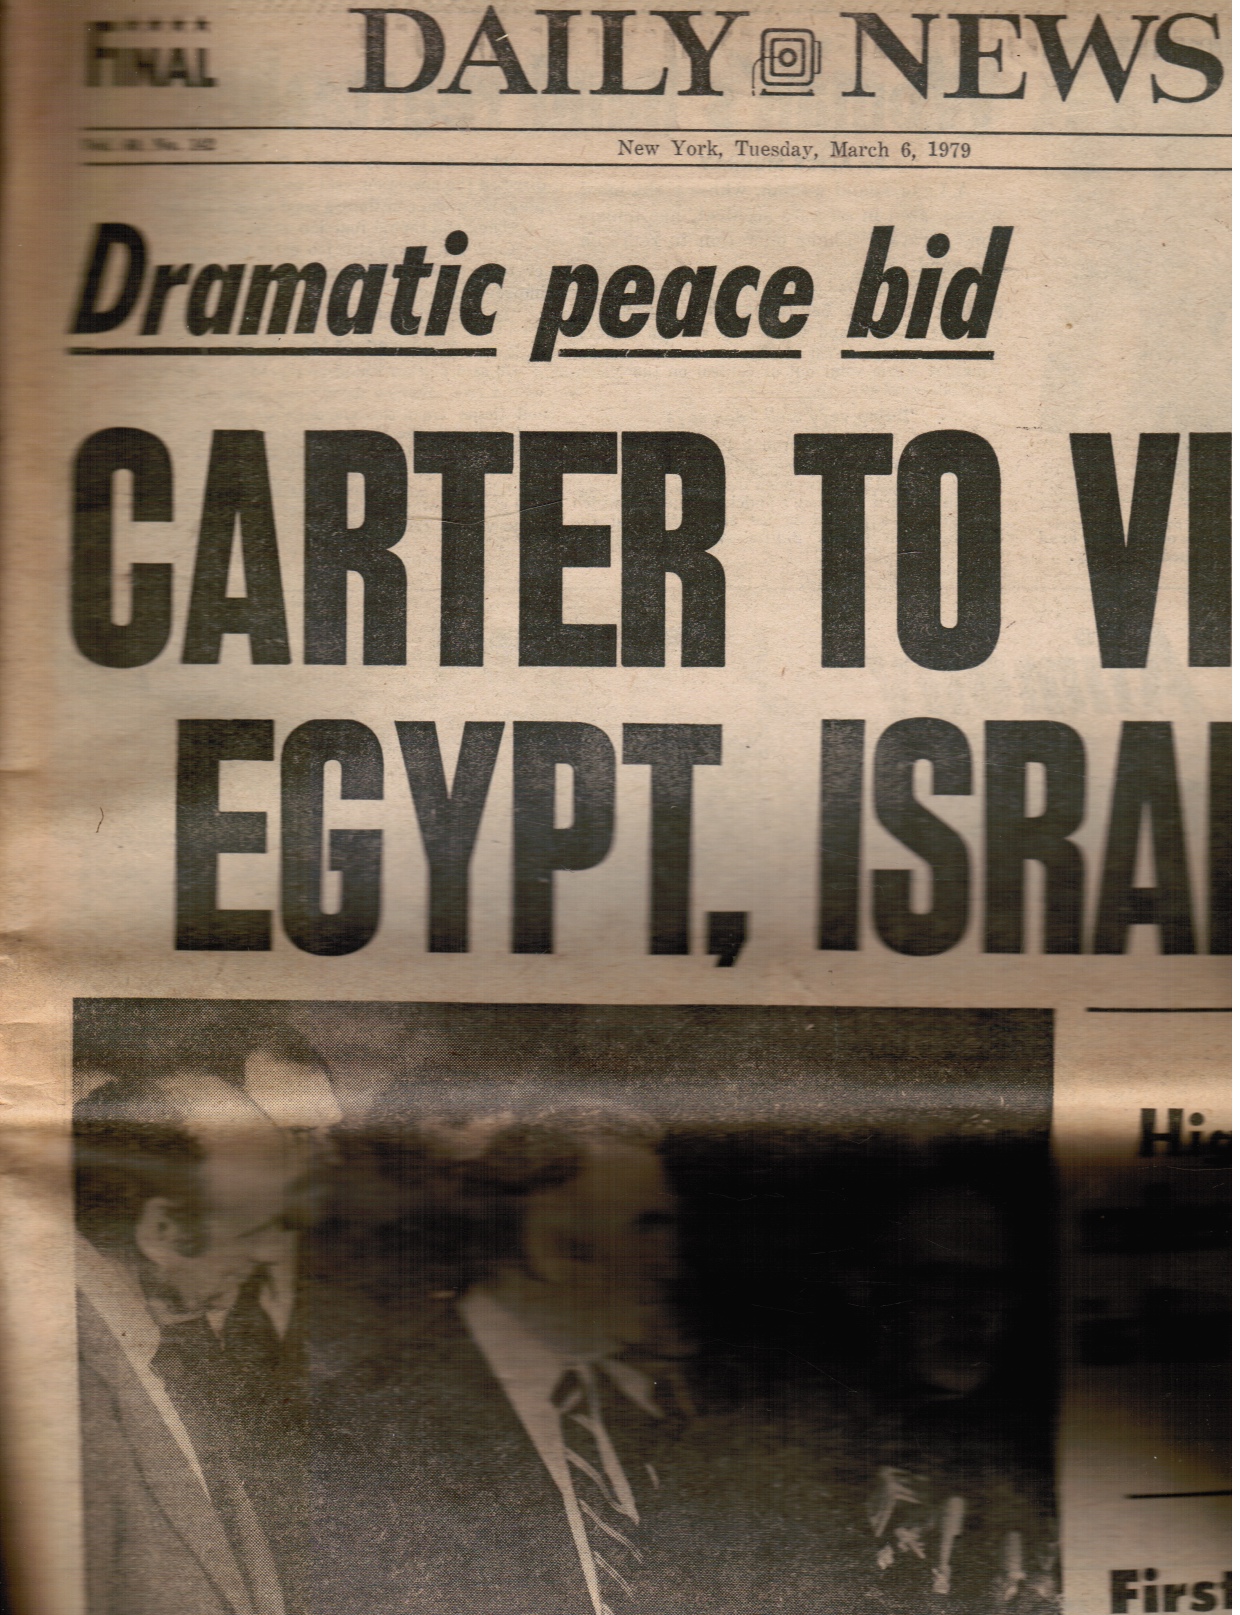 NEW YORK NEWS - 1971: New York Daily News: March 6, 1971 (Jimmy Carter to Visit Egypt, Israel)